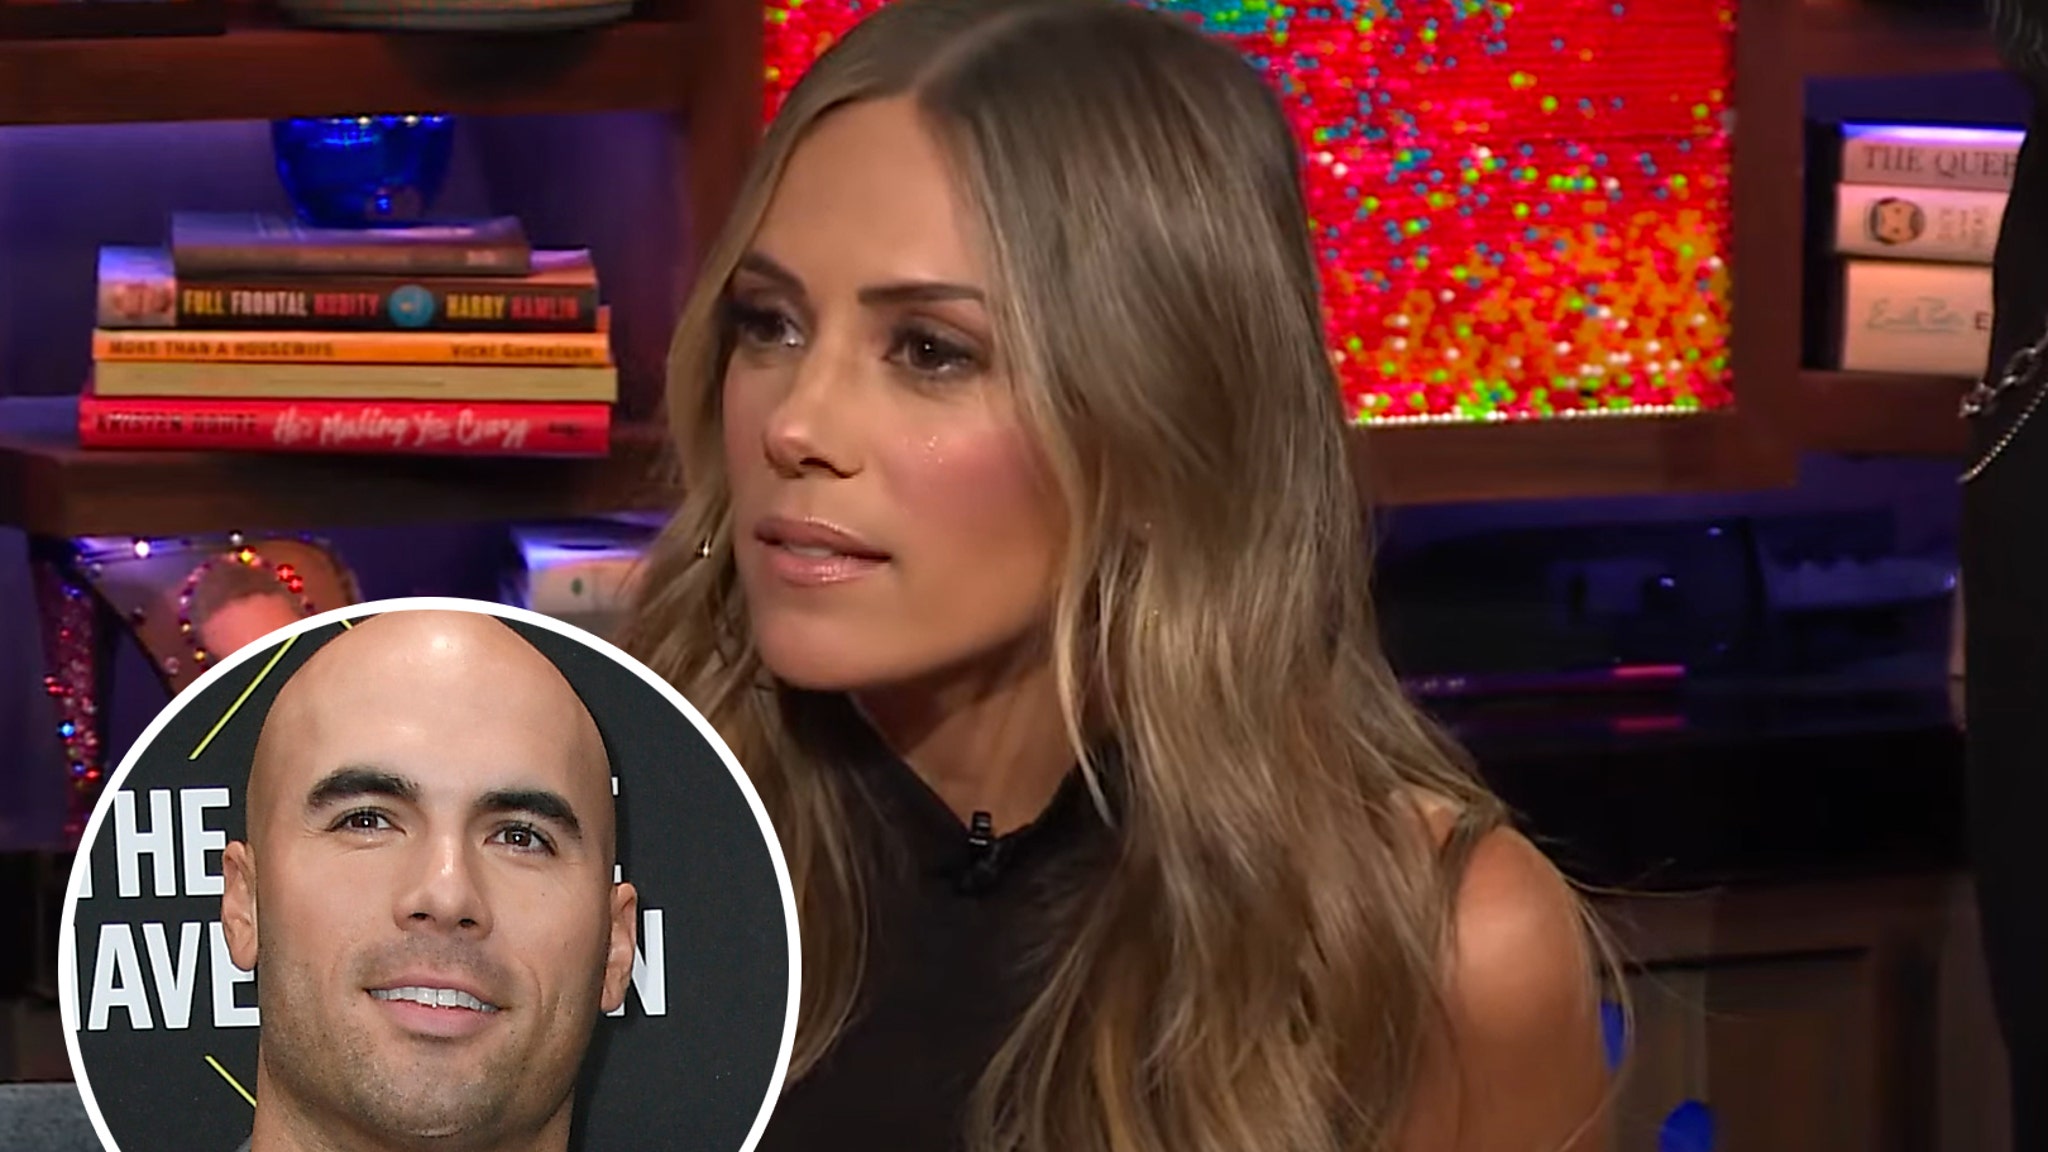 Jana Kramer Shares Secret to Successful Co-Parenting Relationship With Ex Mike Caussin